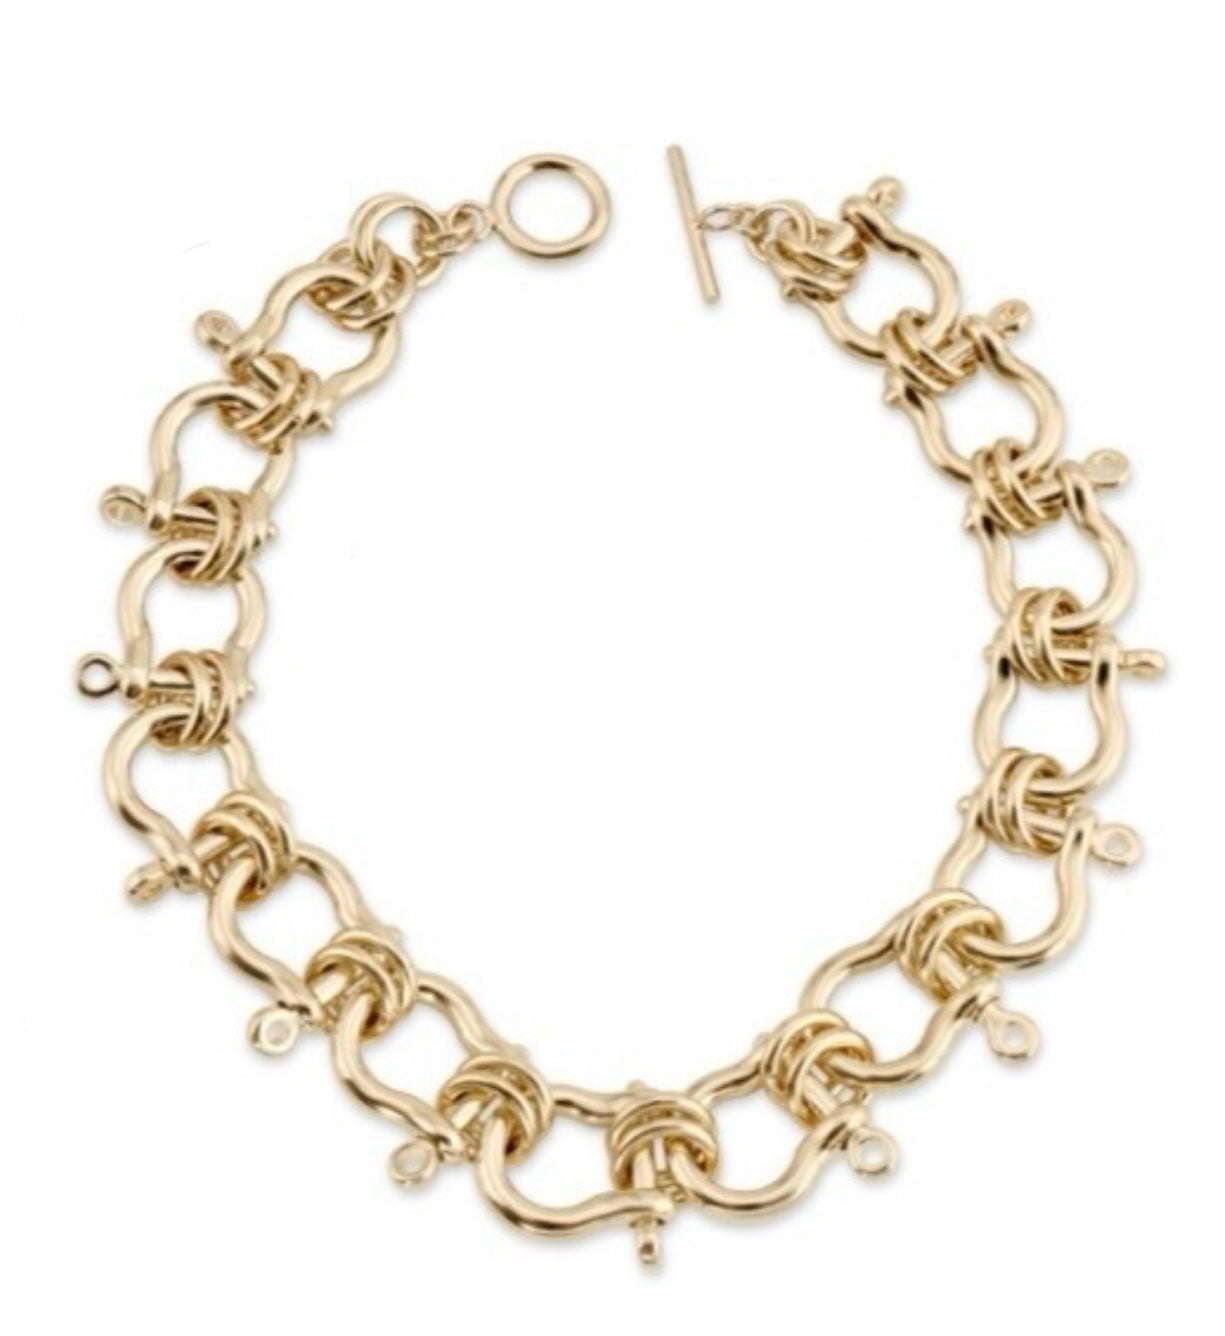 Statement Toggle Necklace